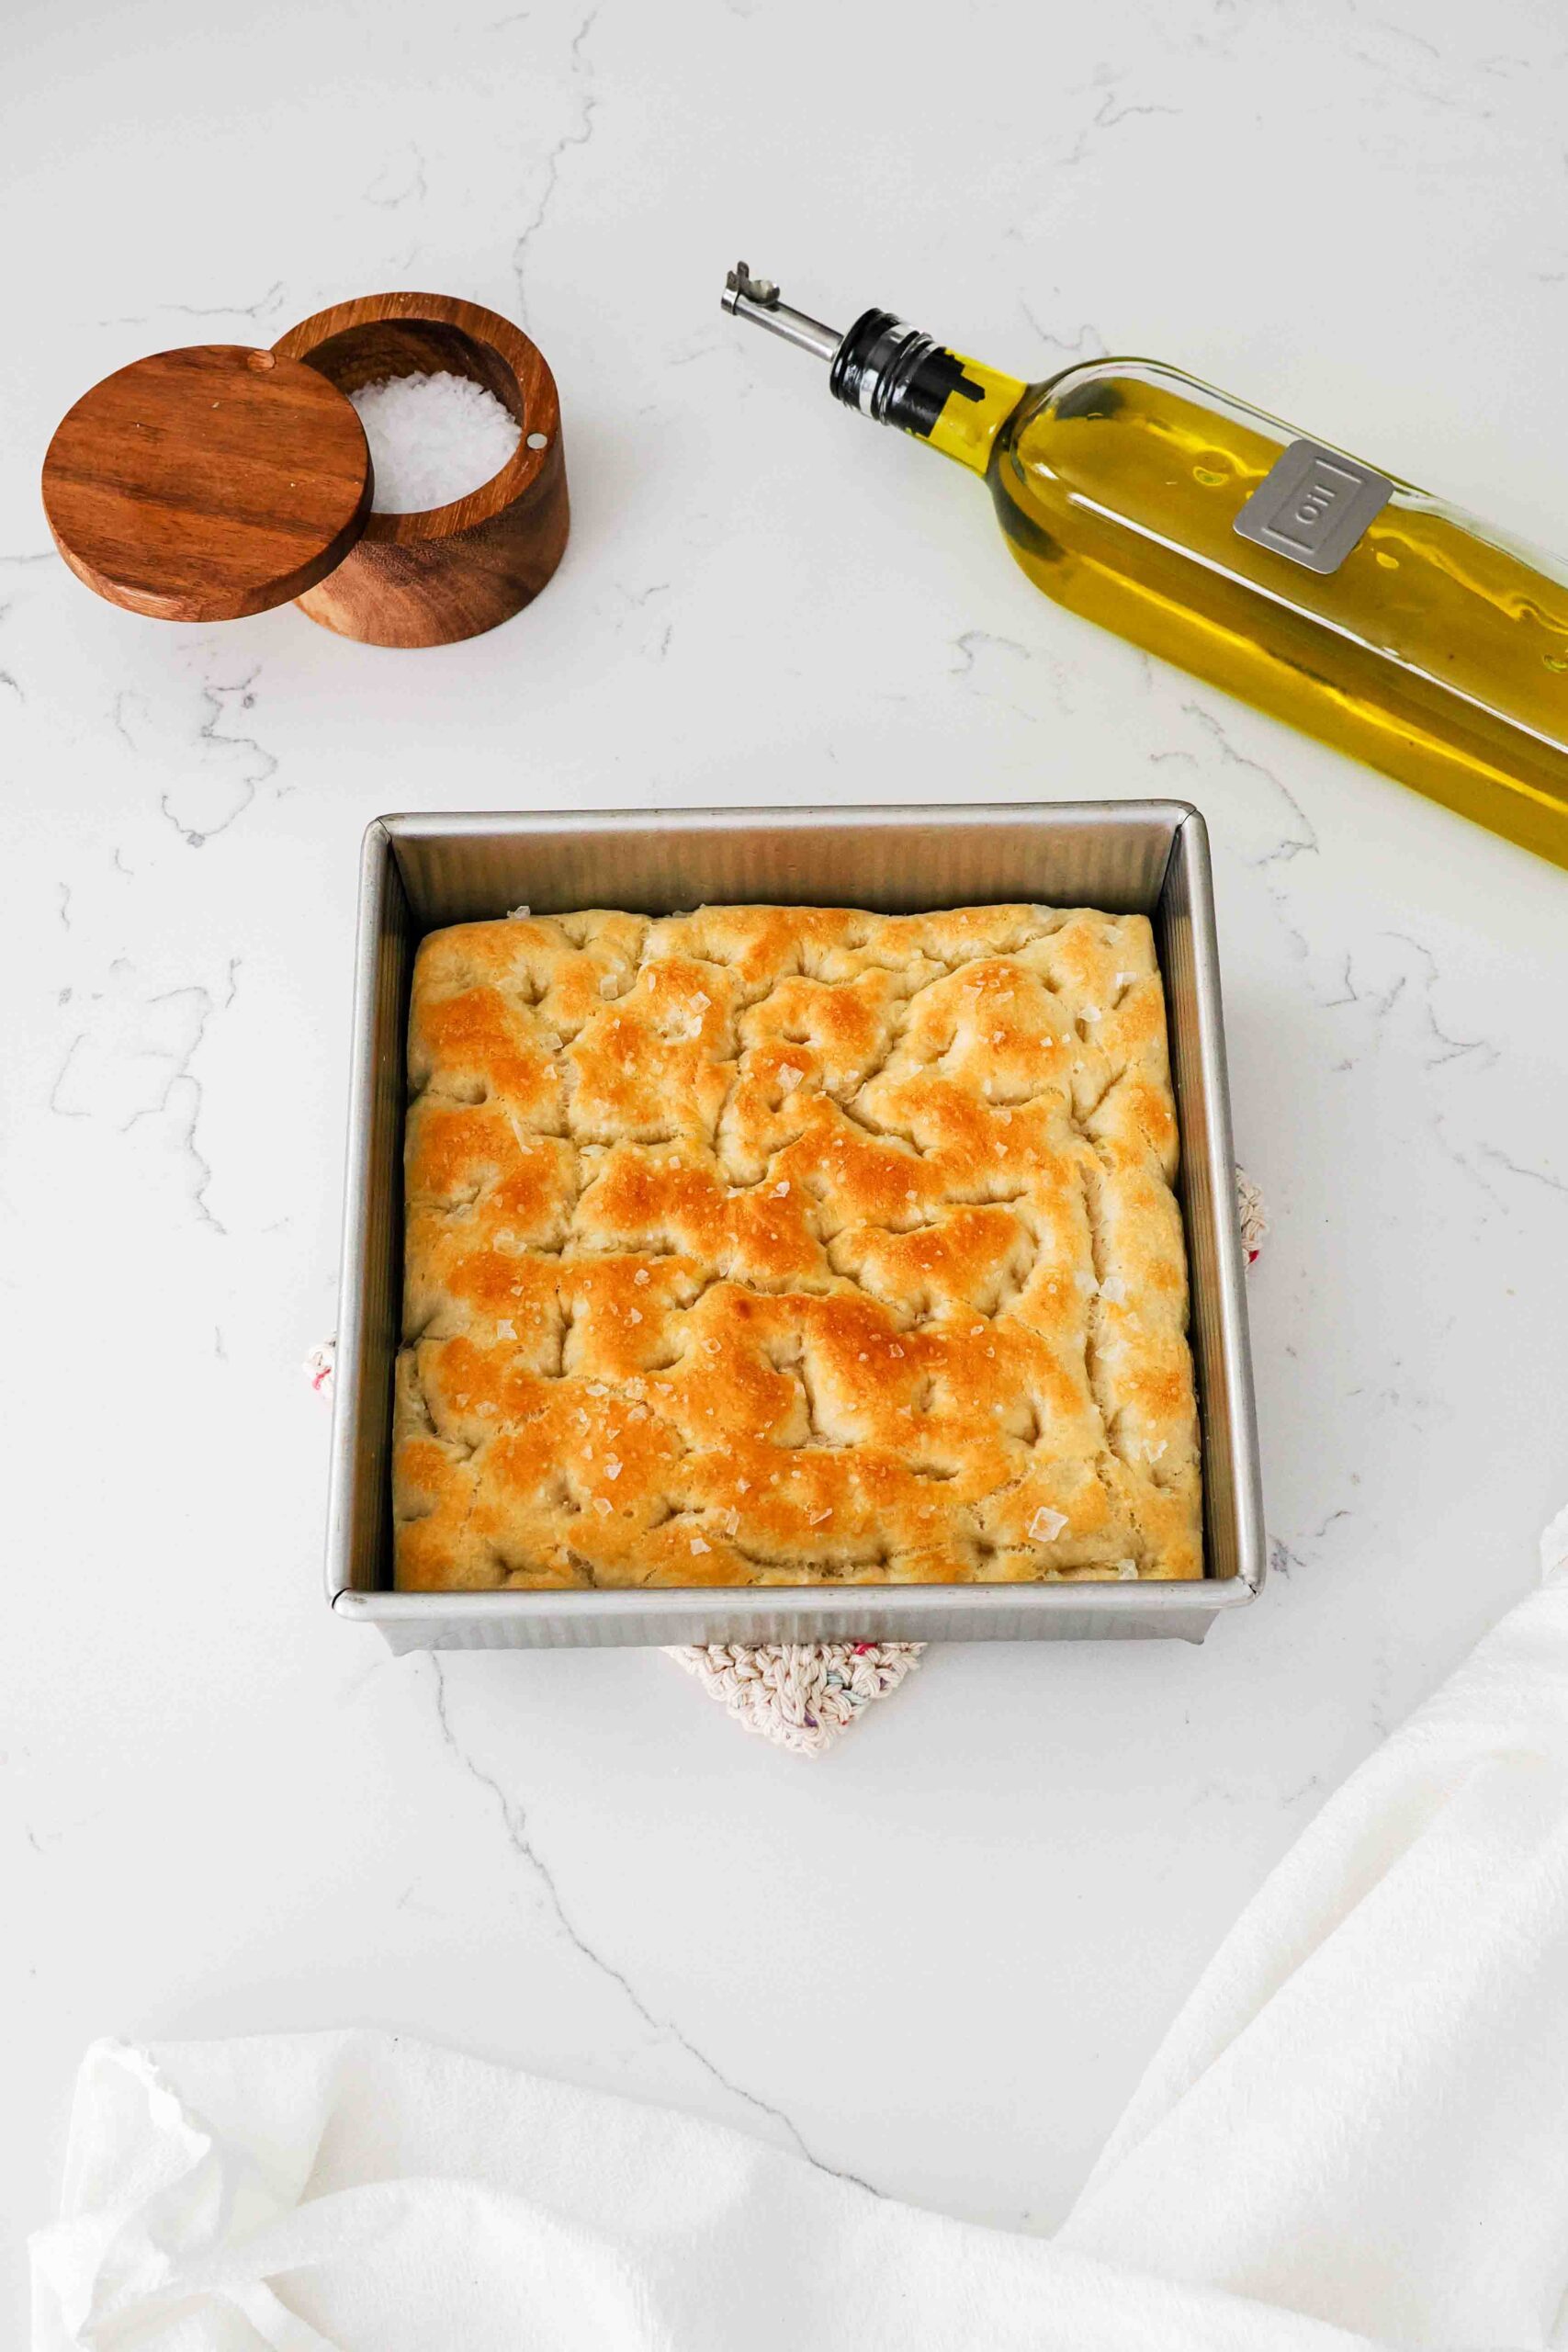 A golden brown loaf of focaccia bread in a square pan on a quartz countertop.